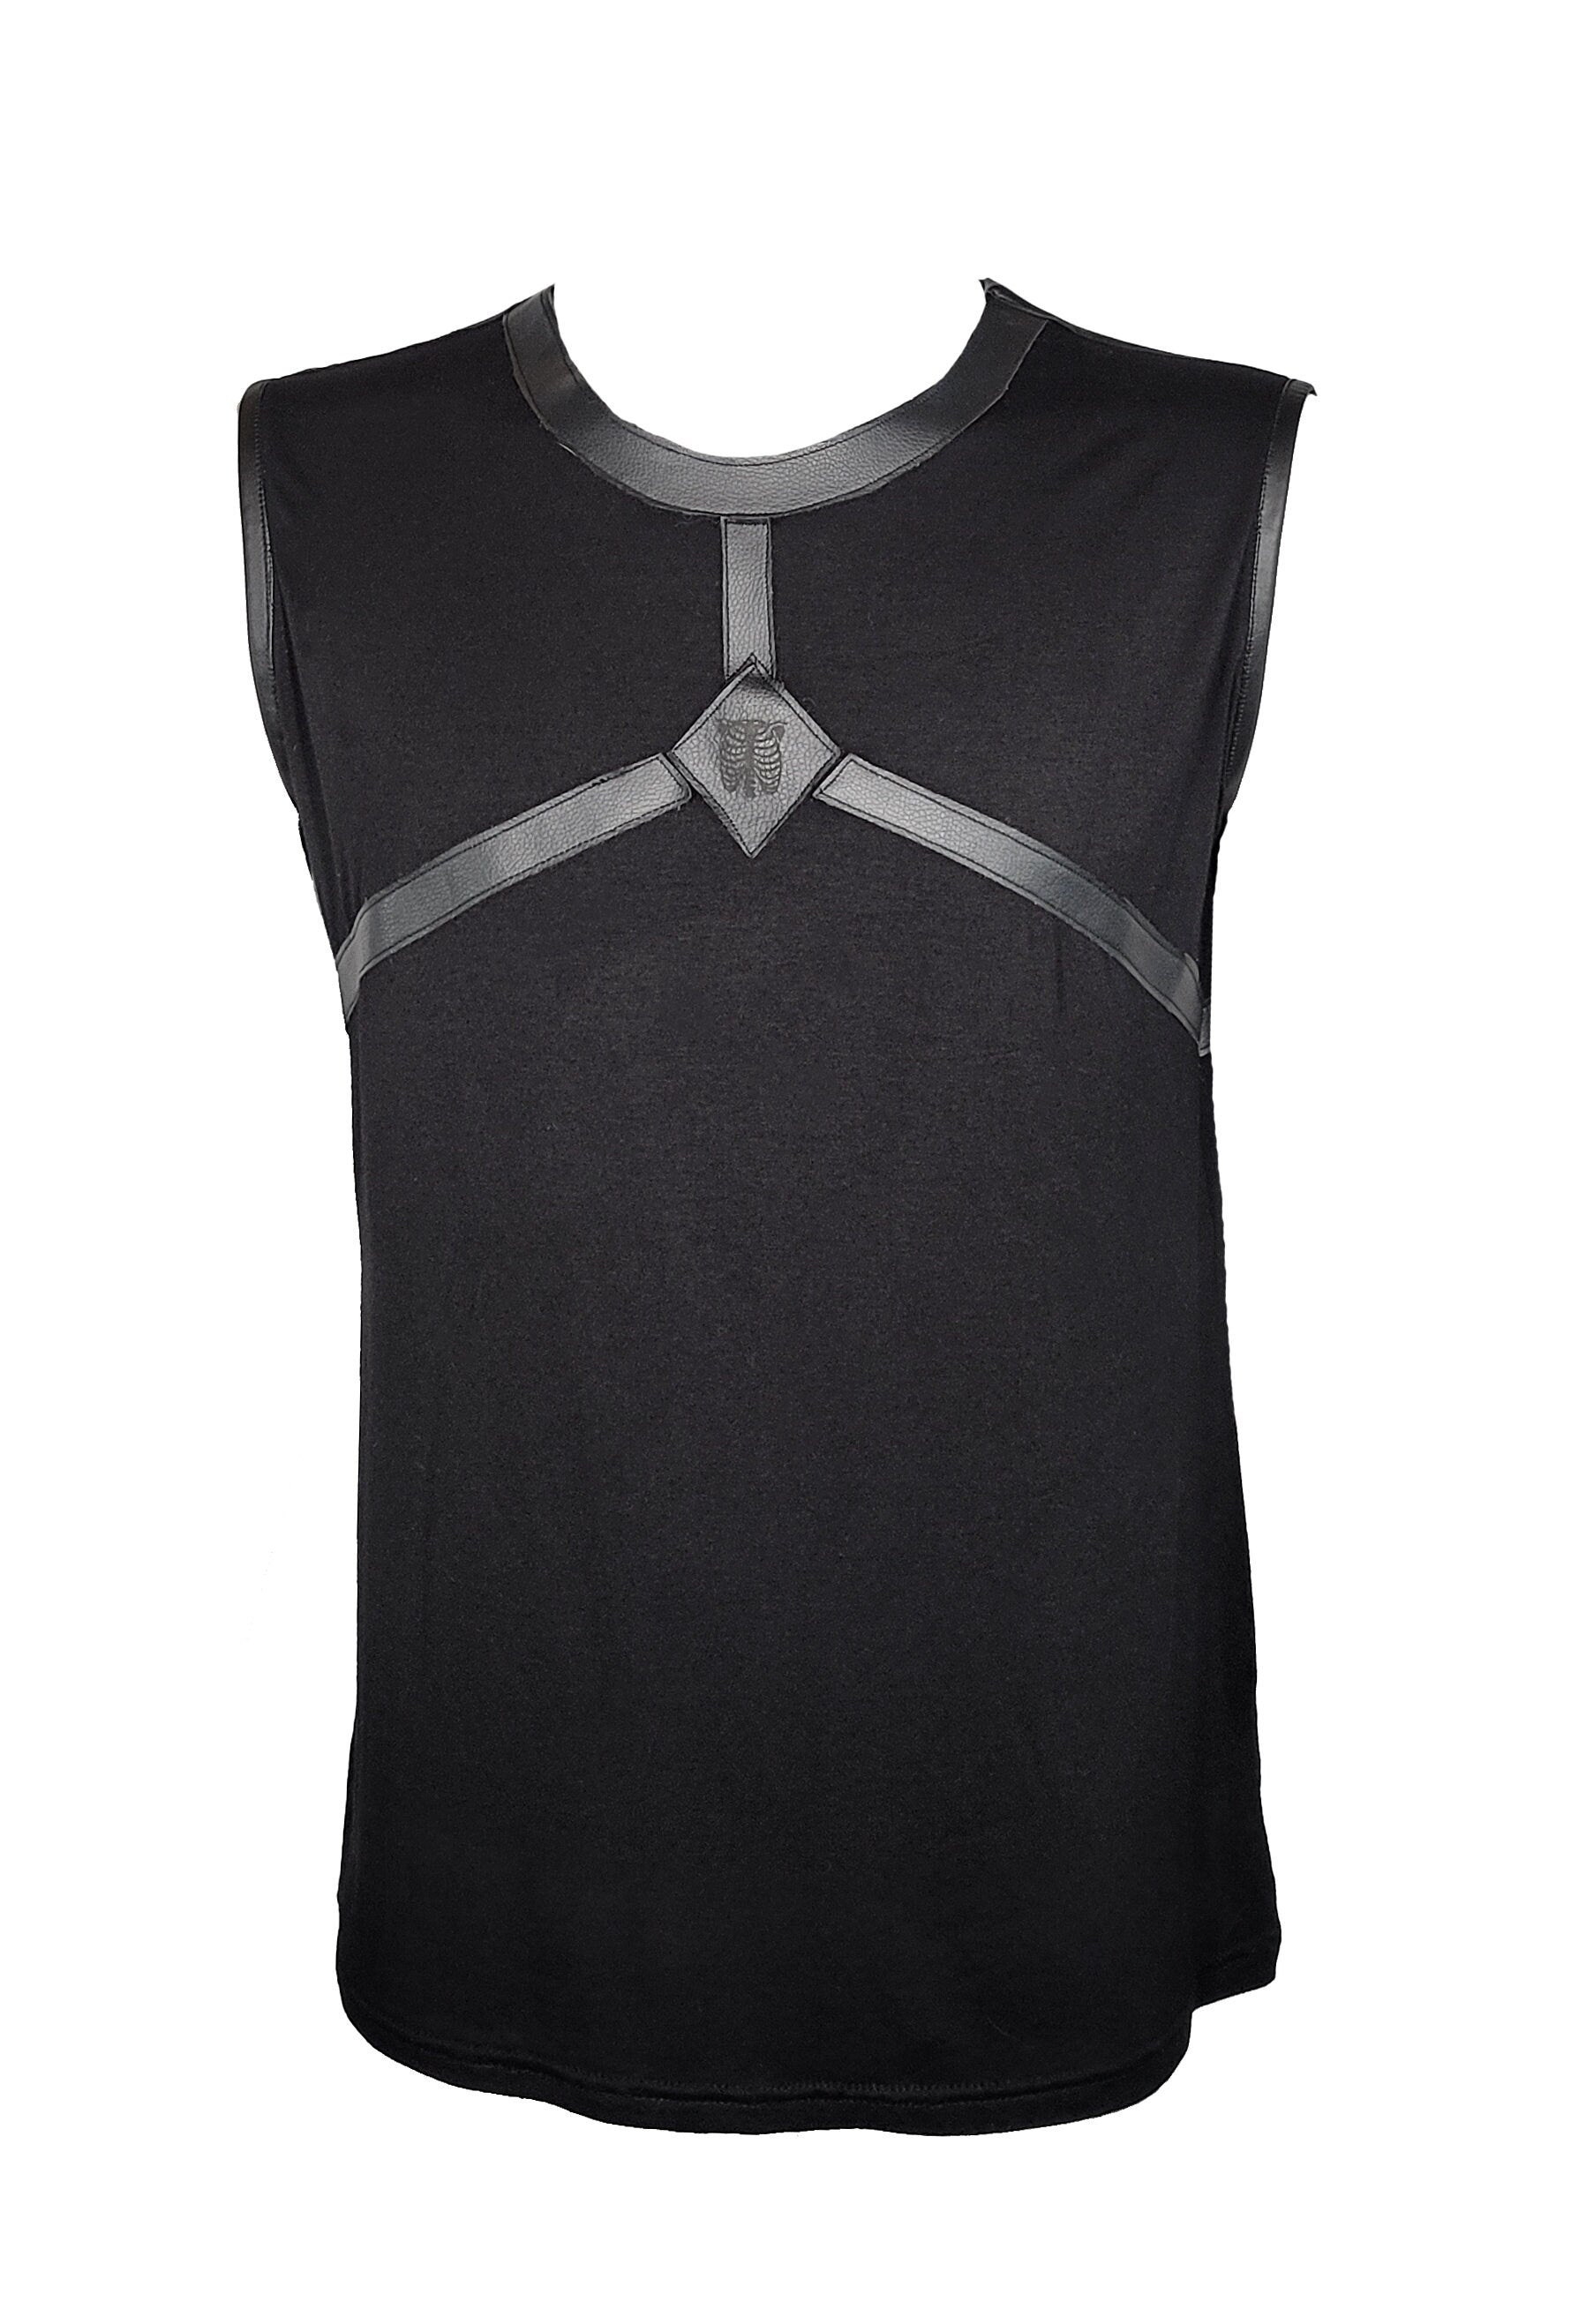 Unisex leather harness goth tank top occult shirt | goth shirt men metal tank top | leather shirt muscle top dark academia shirt